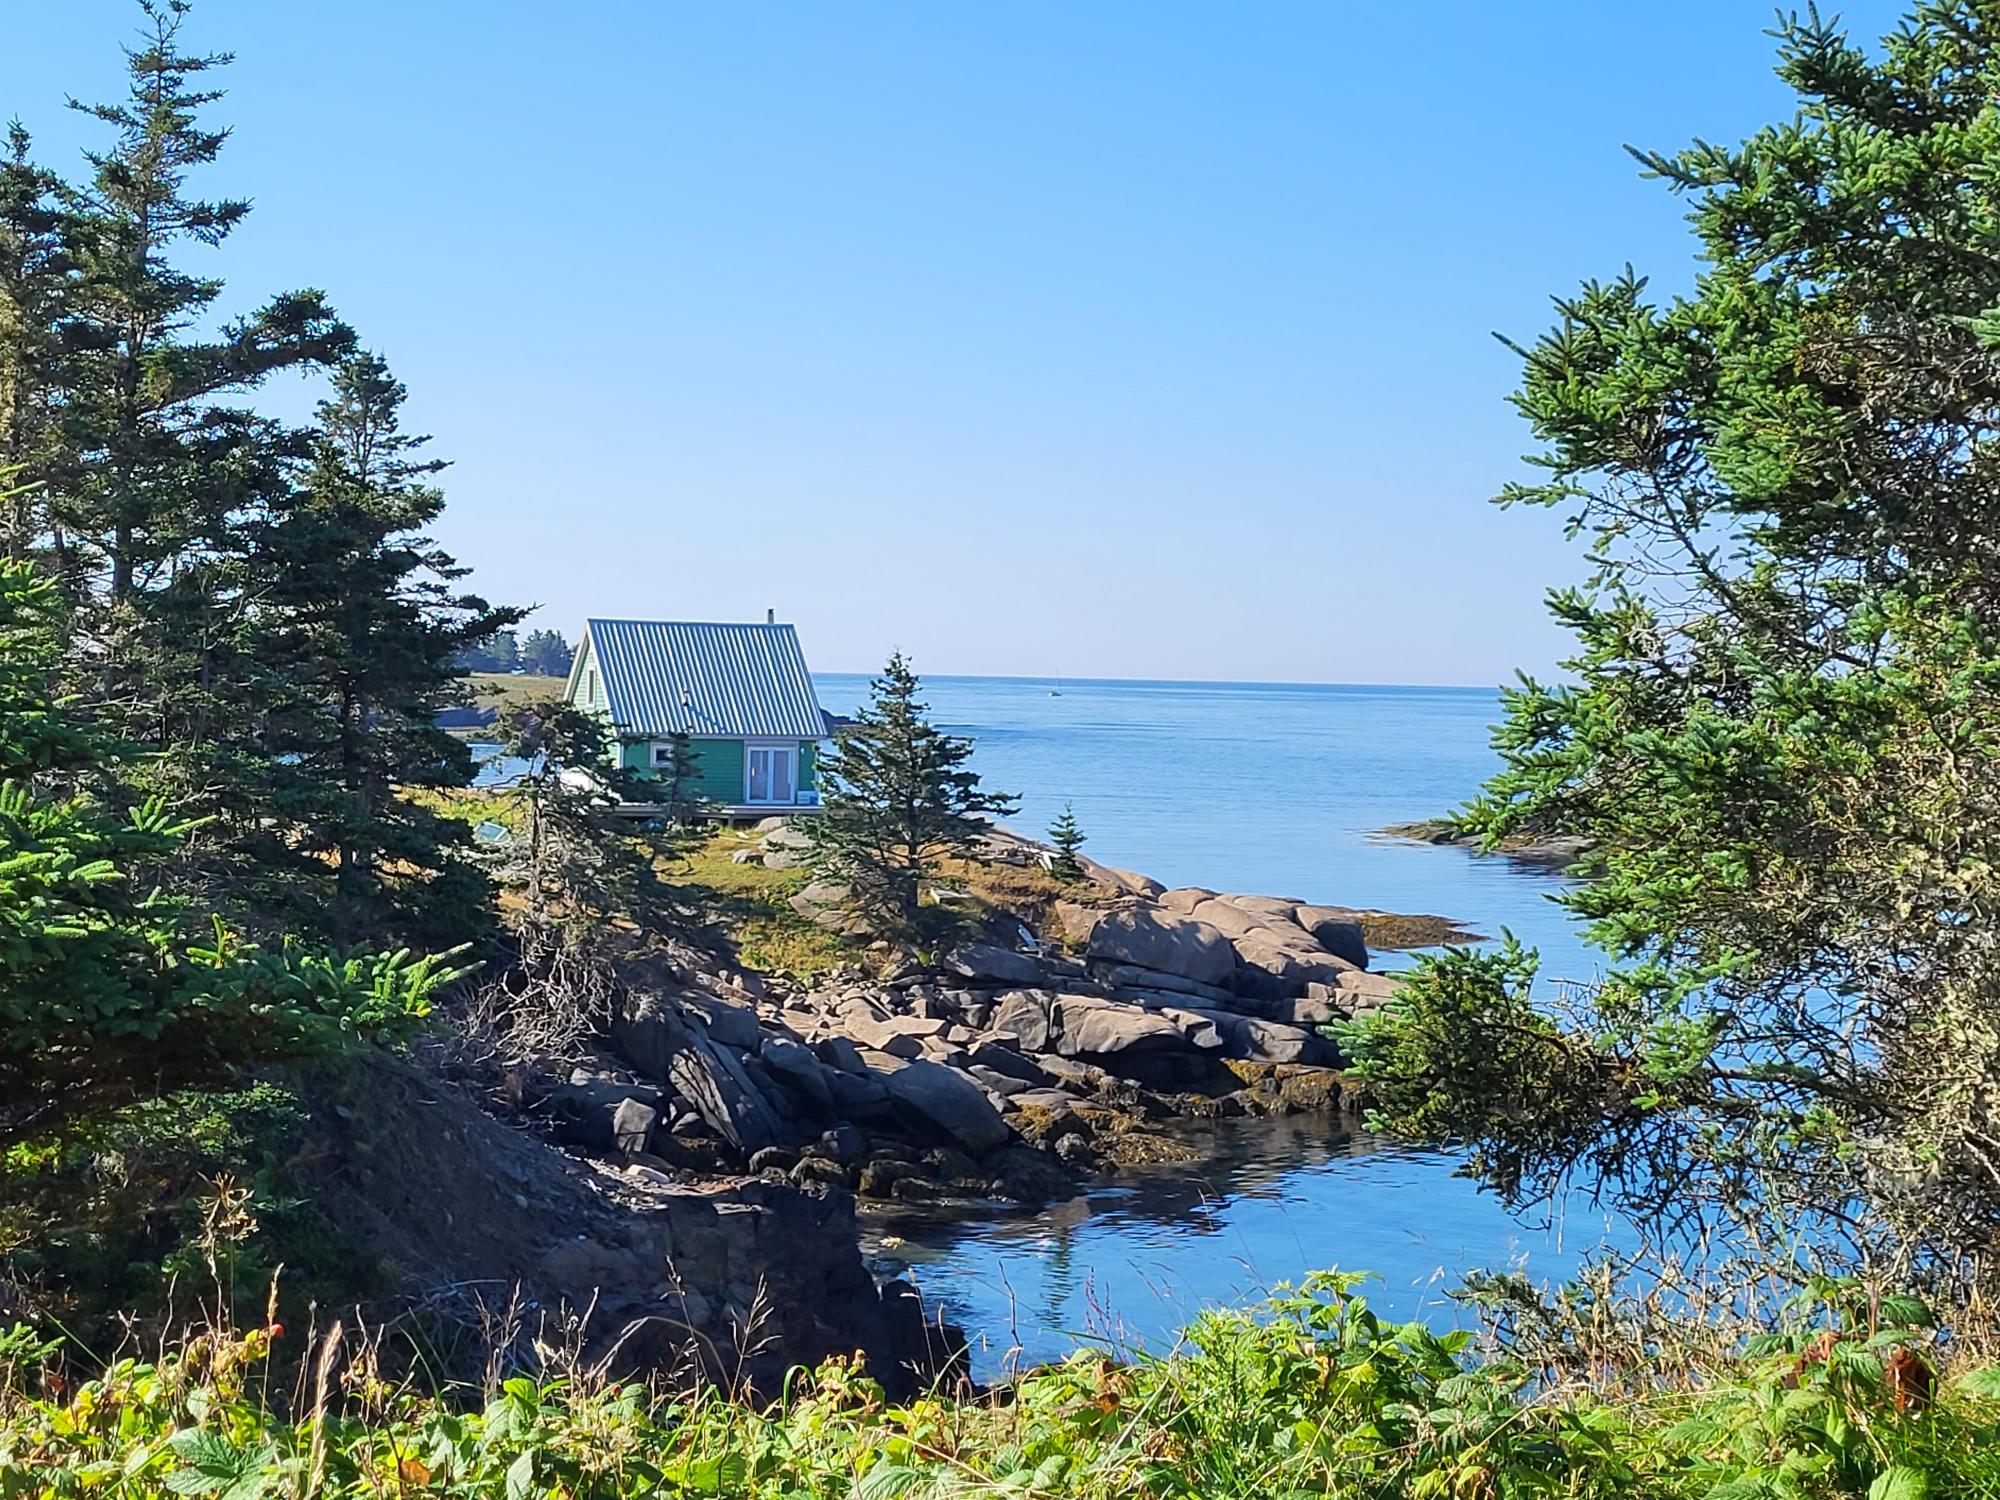 A photograph of a small green house sitting on a rocky and grassy island coast, surrounded by trees and deep blue sea.